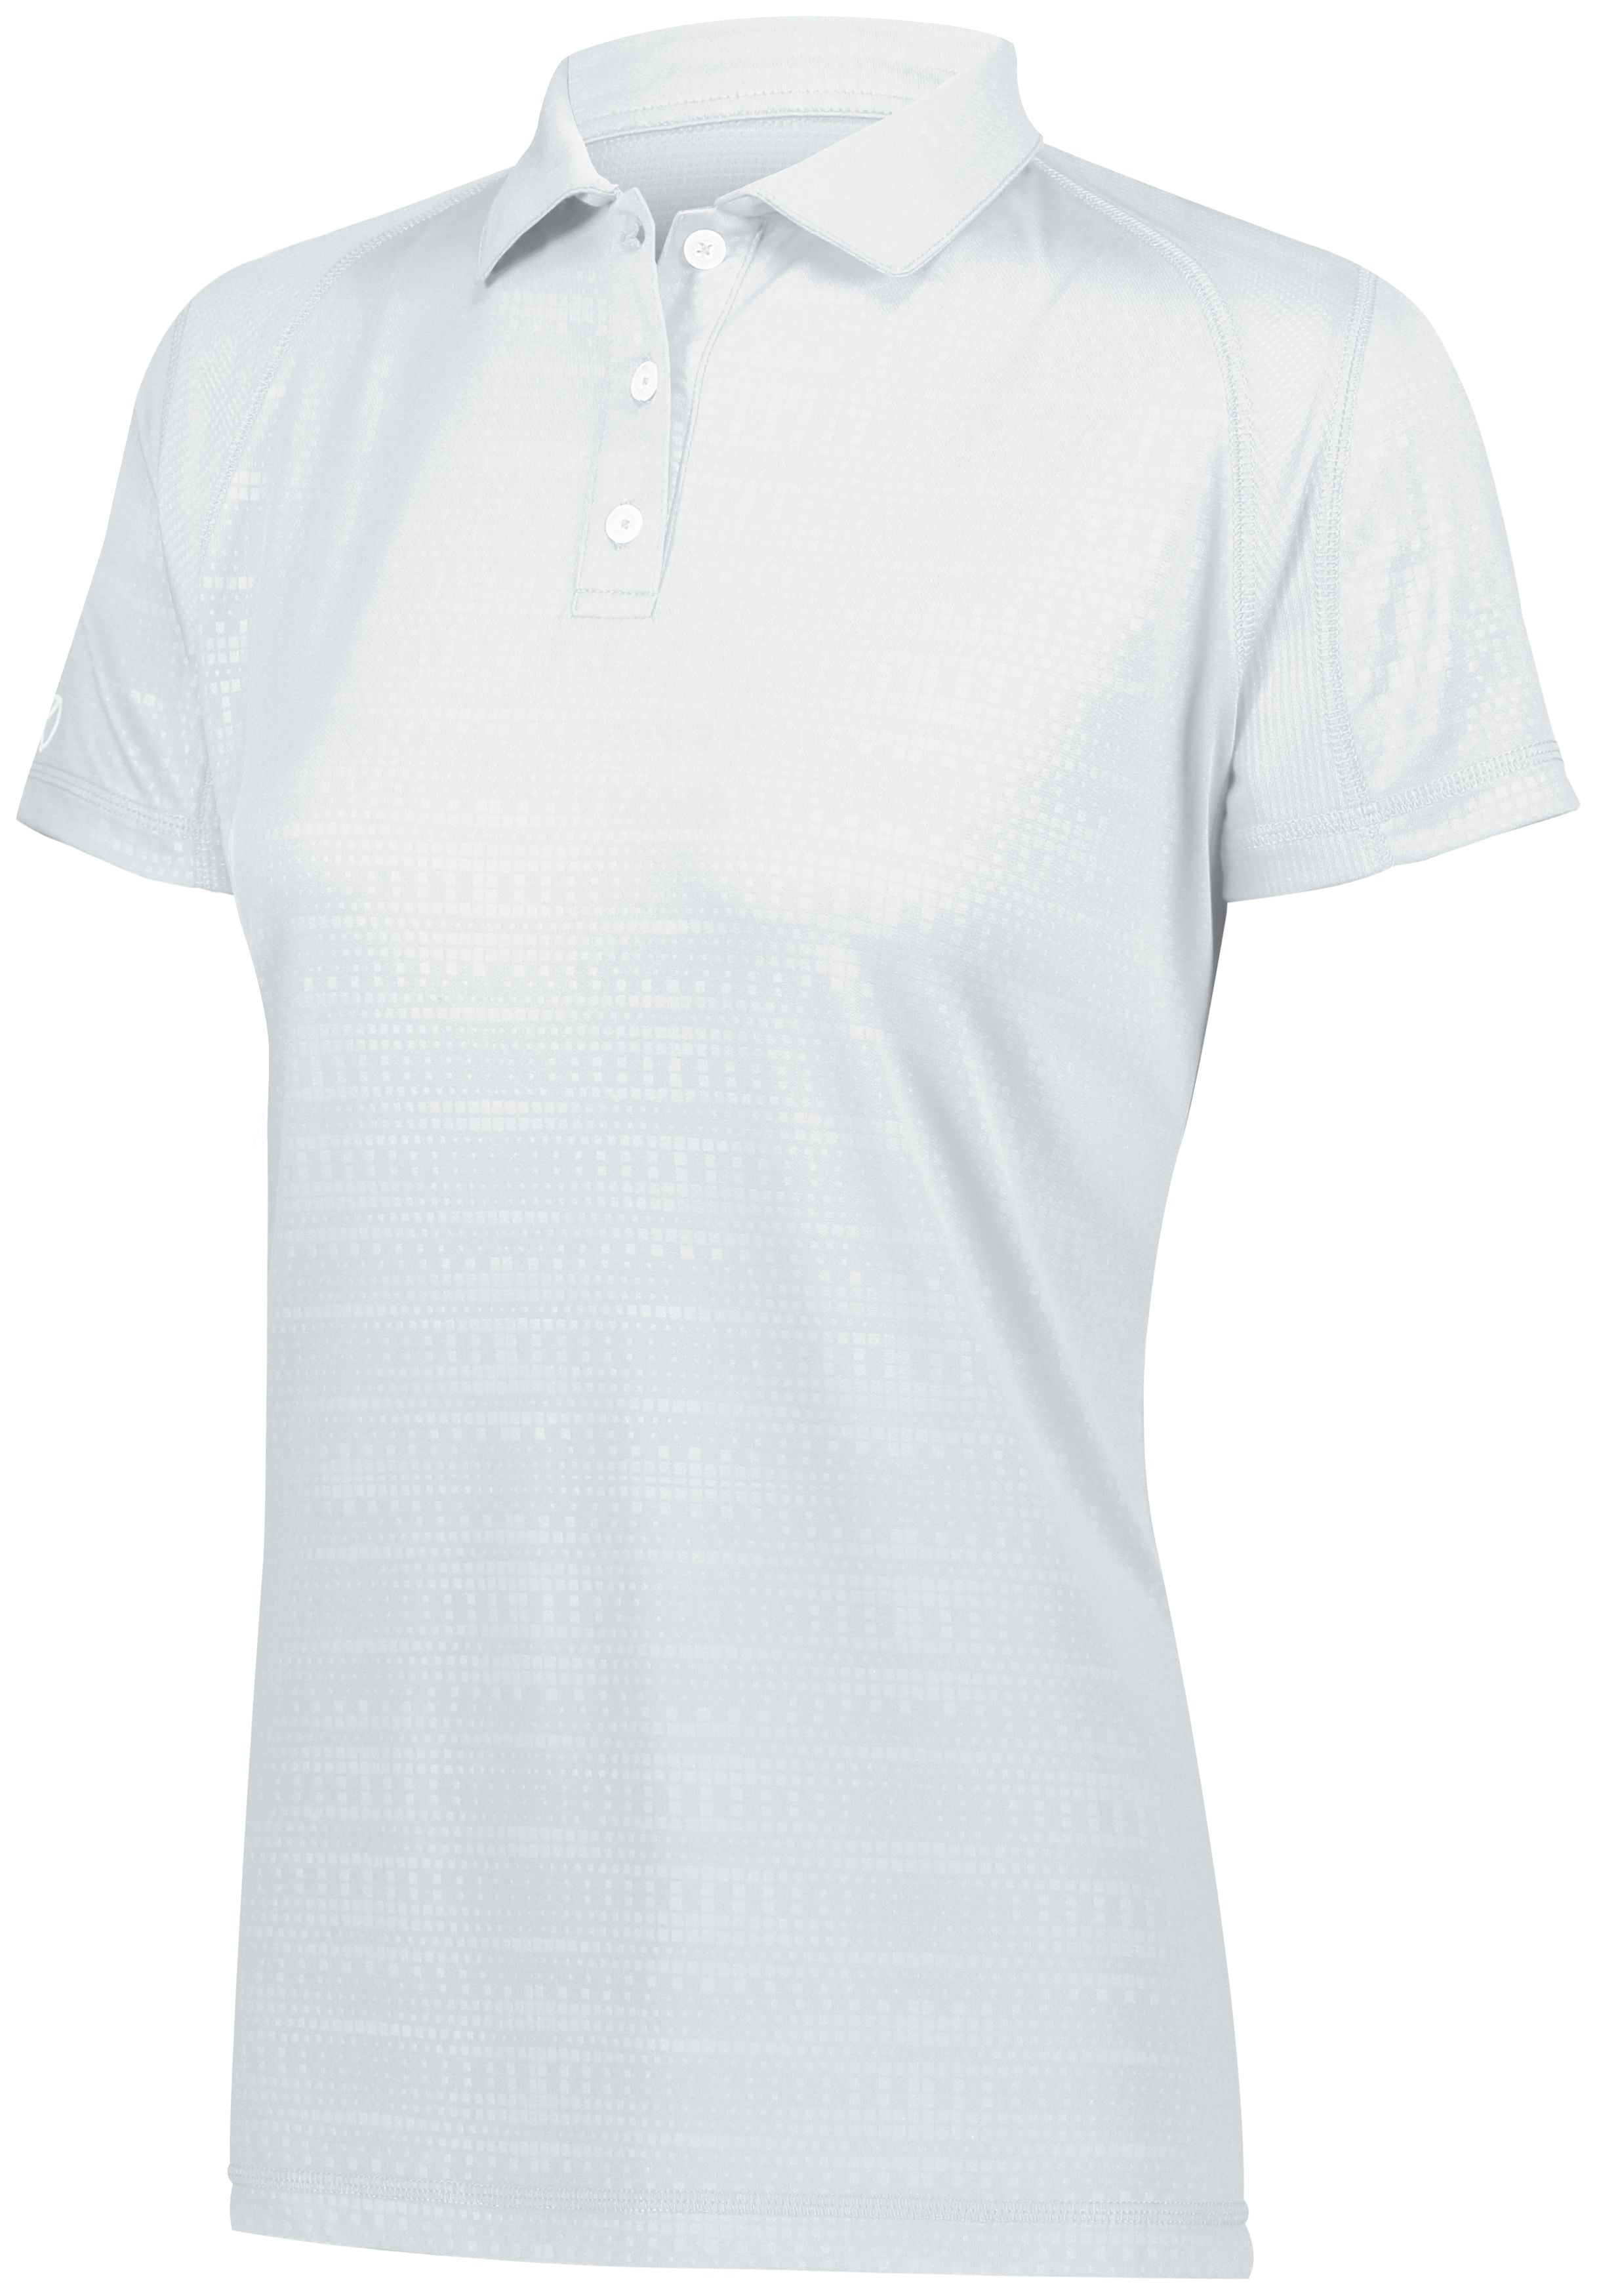 Holloway Ladies Converge Polo in White  -Part of the Ladies, Ladies-Polo, Polos, Holloway, Shirts, Converge-Collection product lines at KanaleyCreations.com